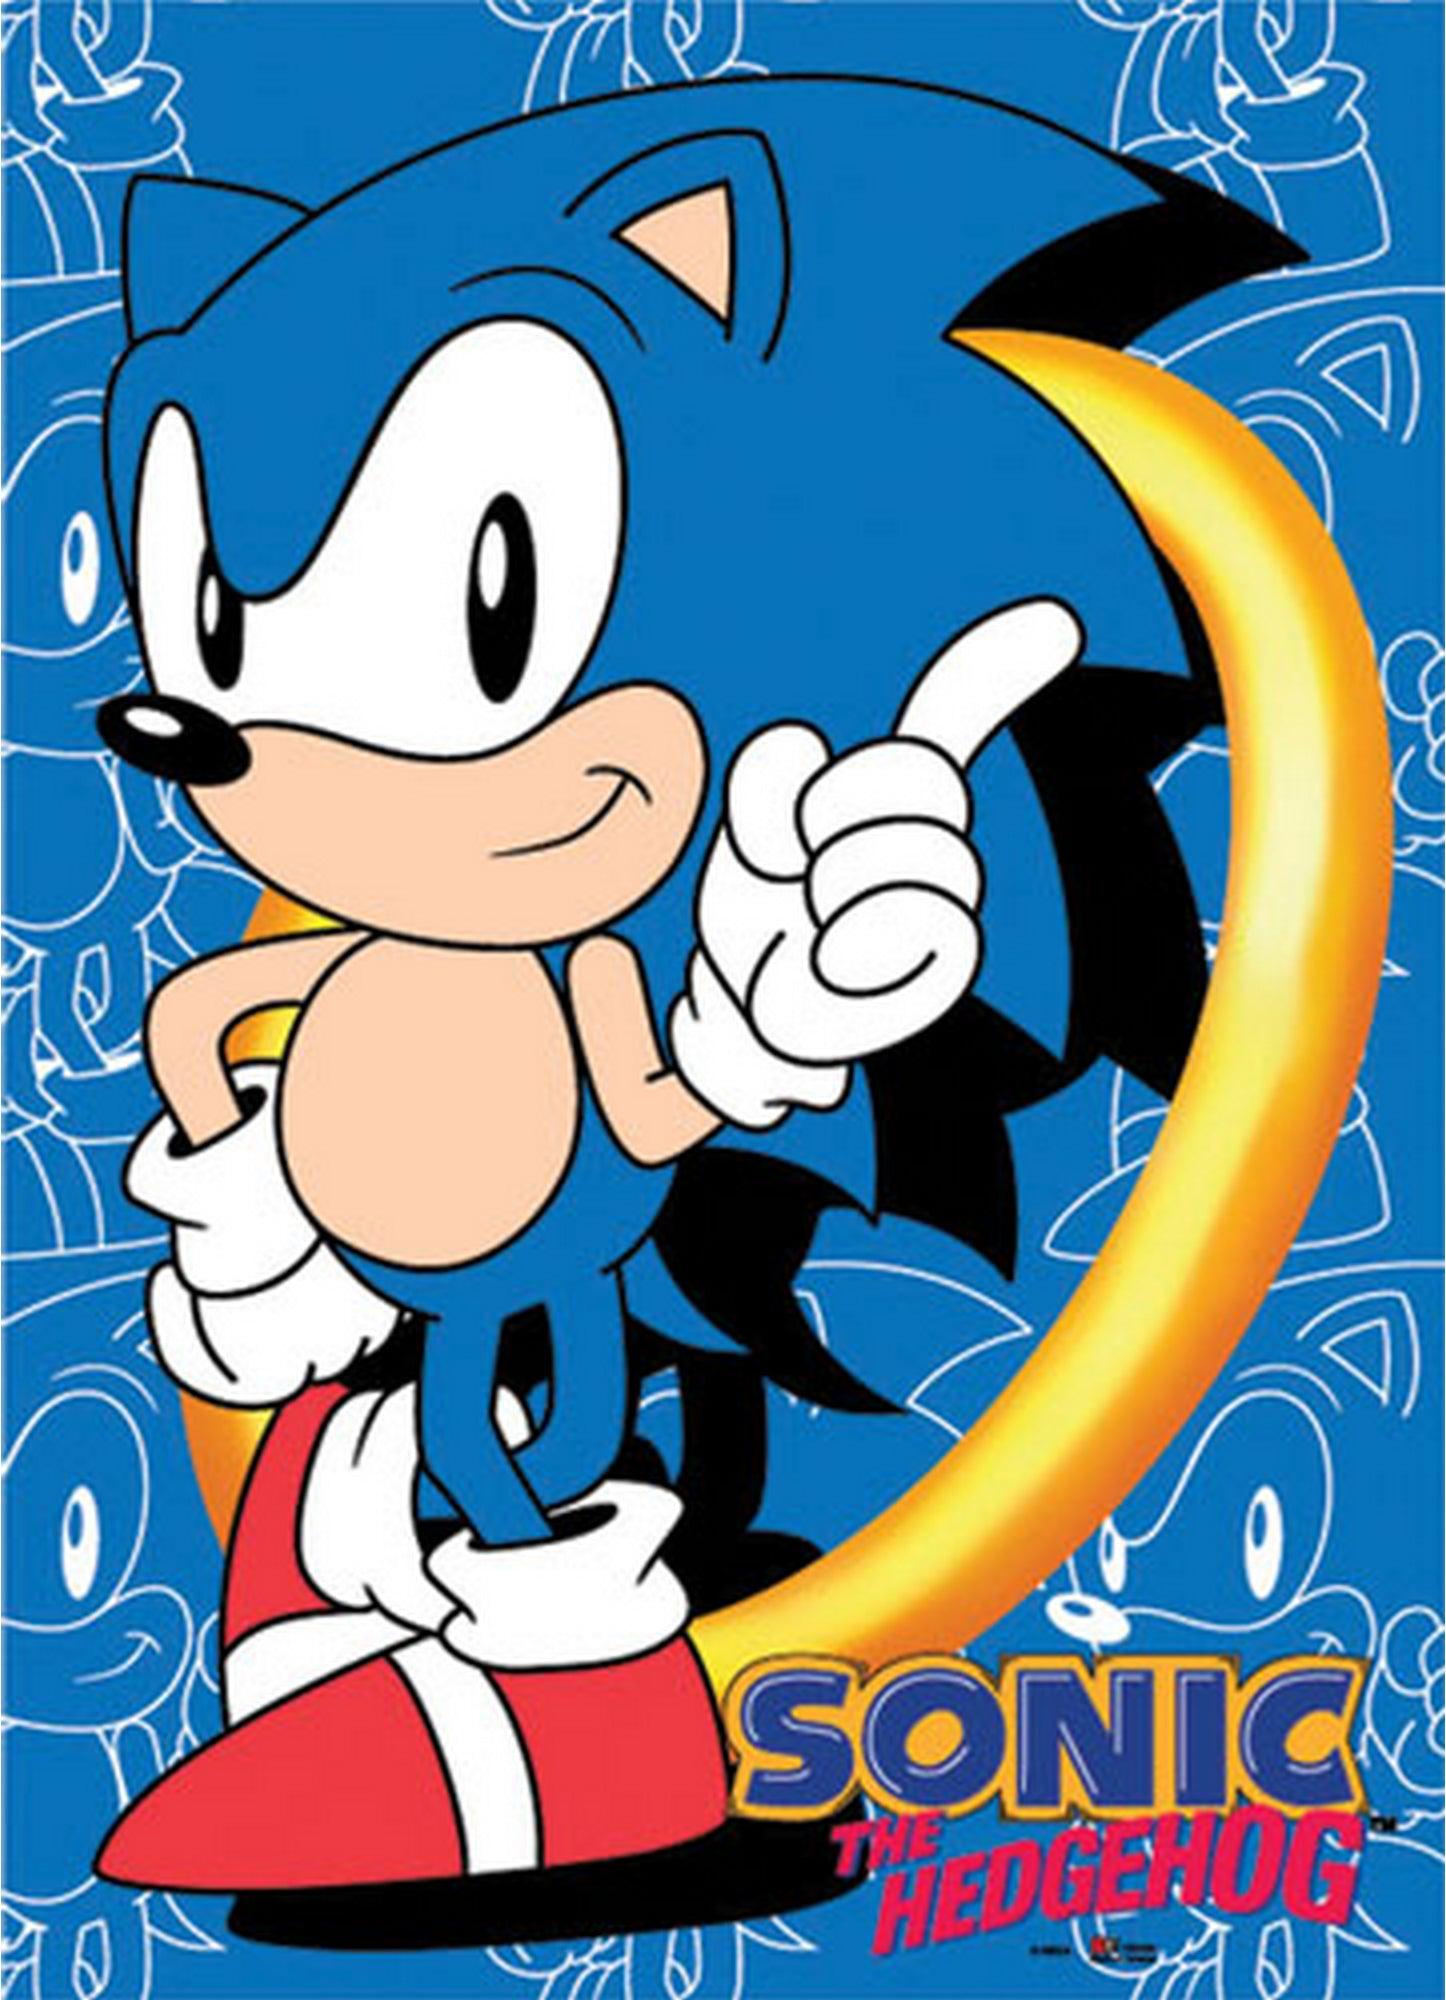 Sonic the Hedgehog Sonic enamel pin and magnet Classic -  Portugal